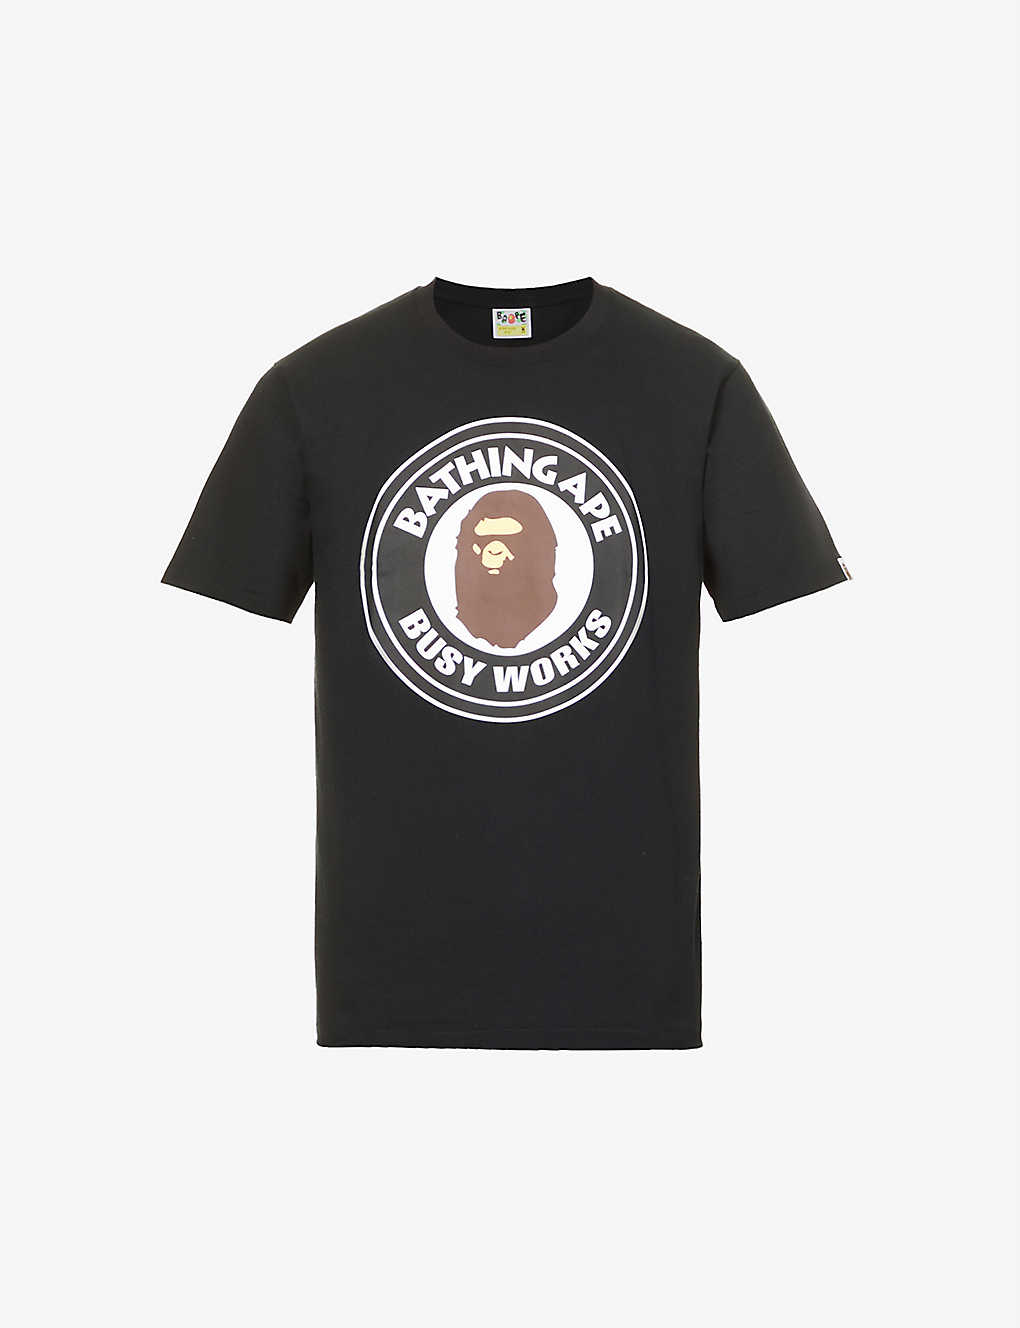 A BATHING APE BUSY WORKS BRAND-PRINT COTTON-JERSEY T-SHIRT